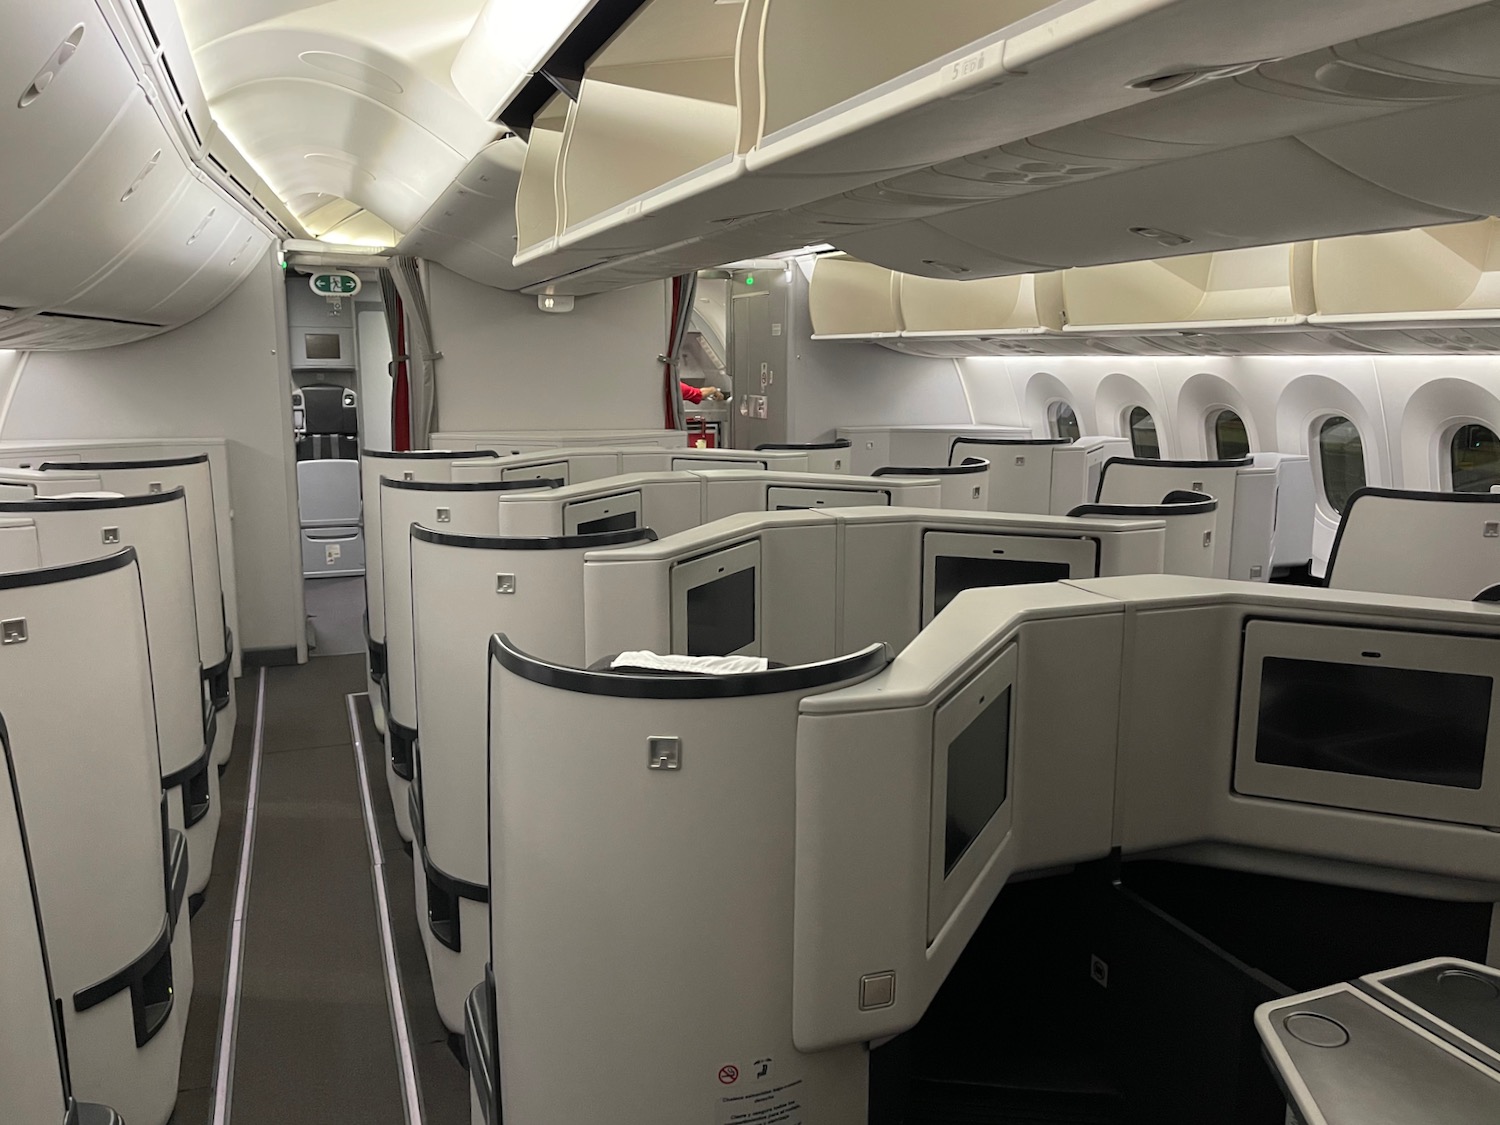 an airplane with rows of seats and windows